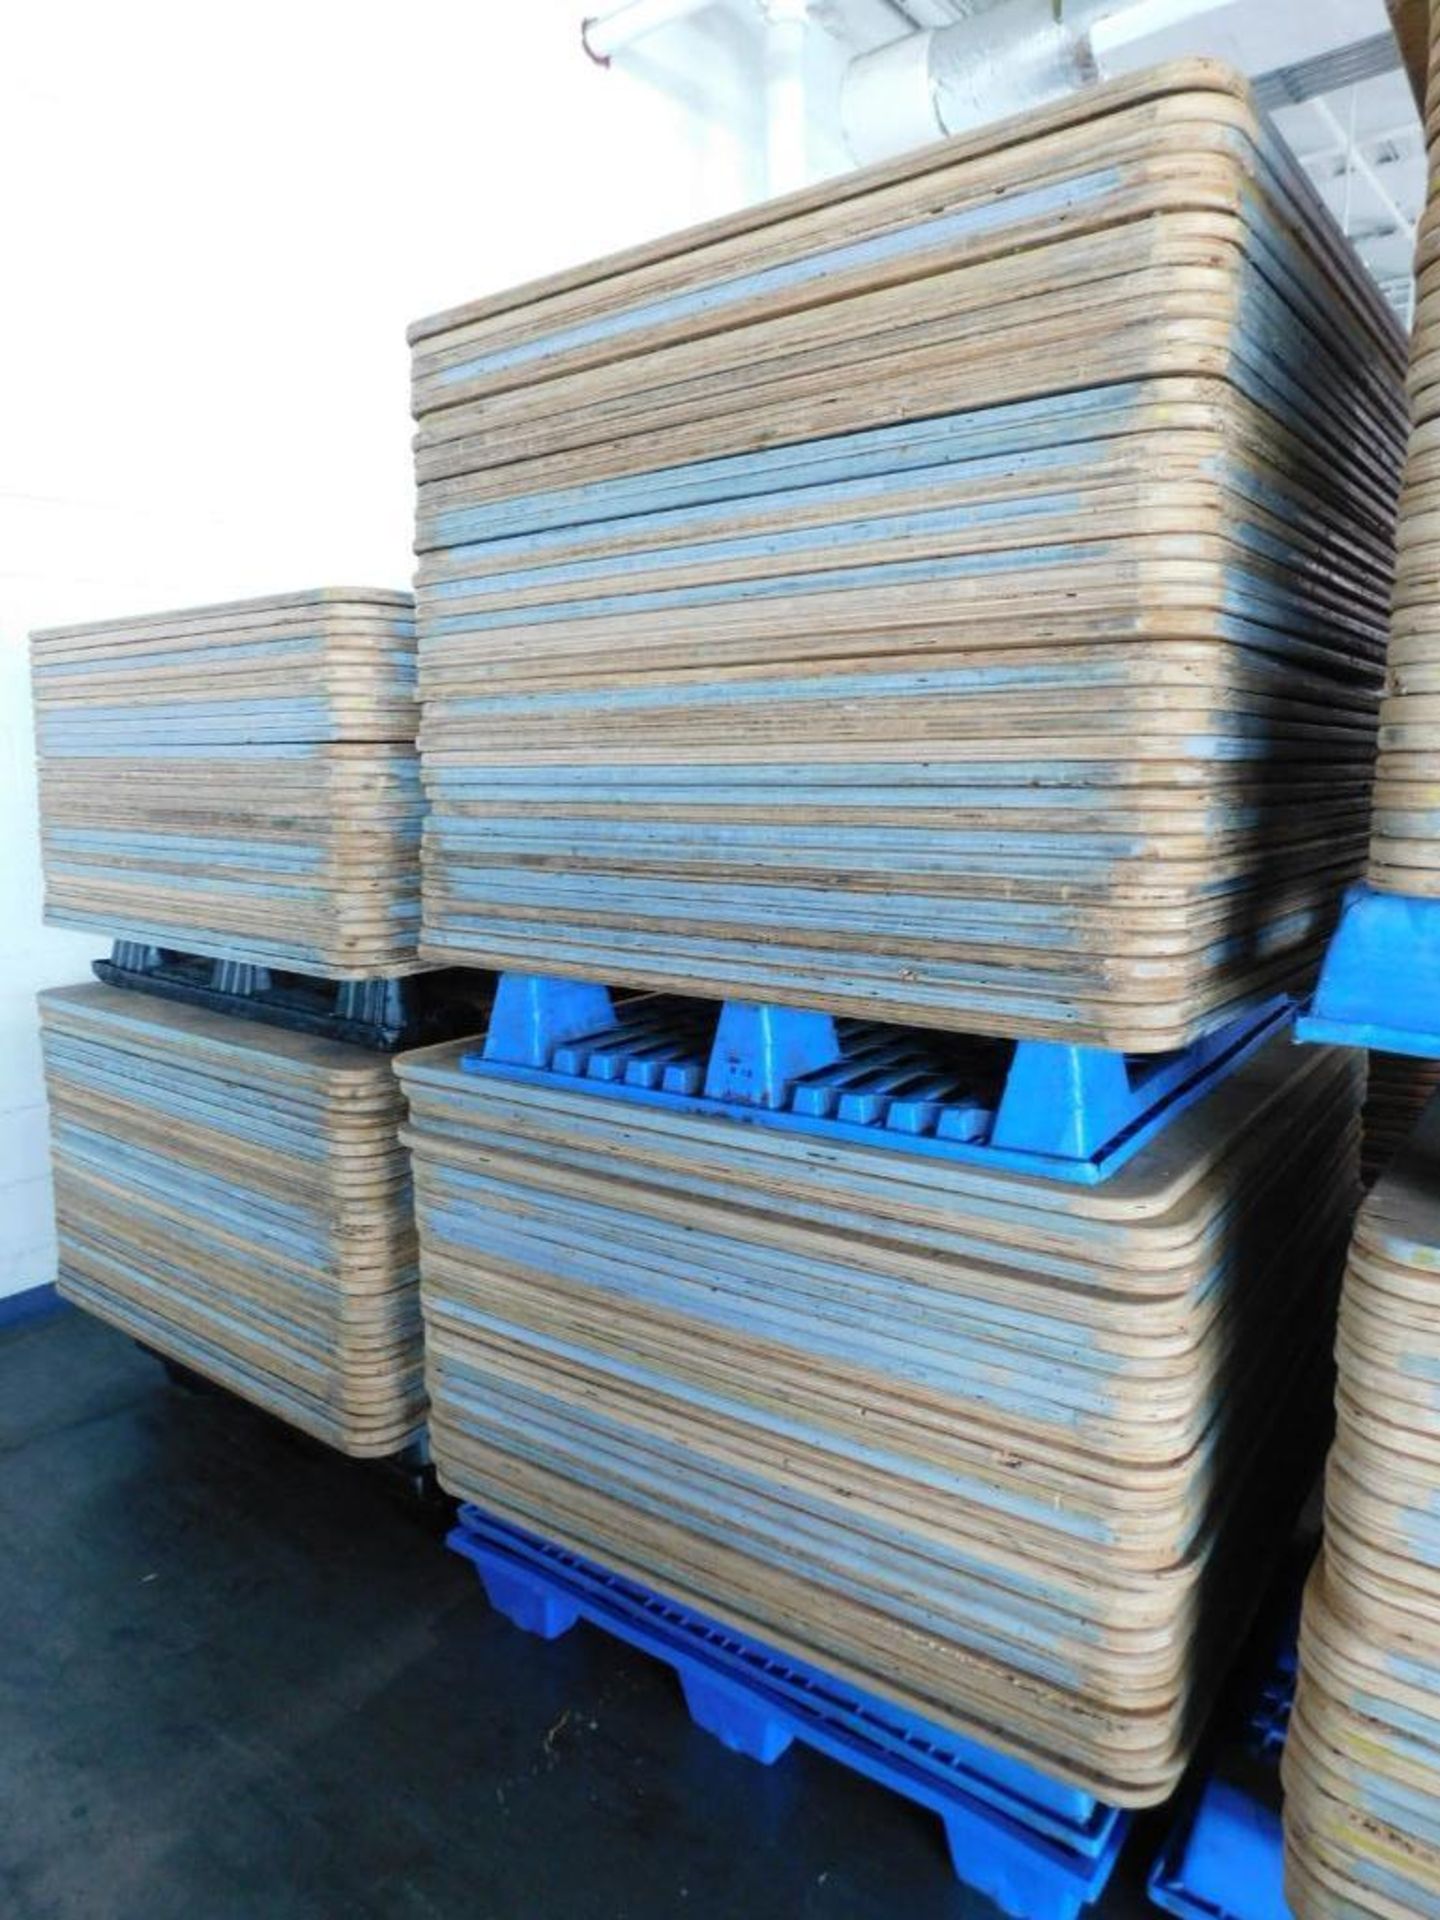 LOT: Large Quantity of 50" x 50" Wood Paper Roll Pallets on (12) Plastic Pallets (LOCATION: IN MAIL - Image 7 of 7